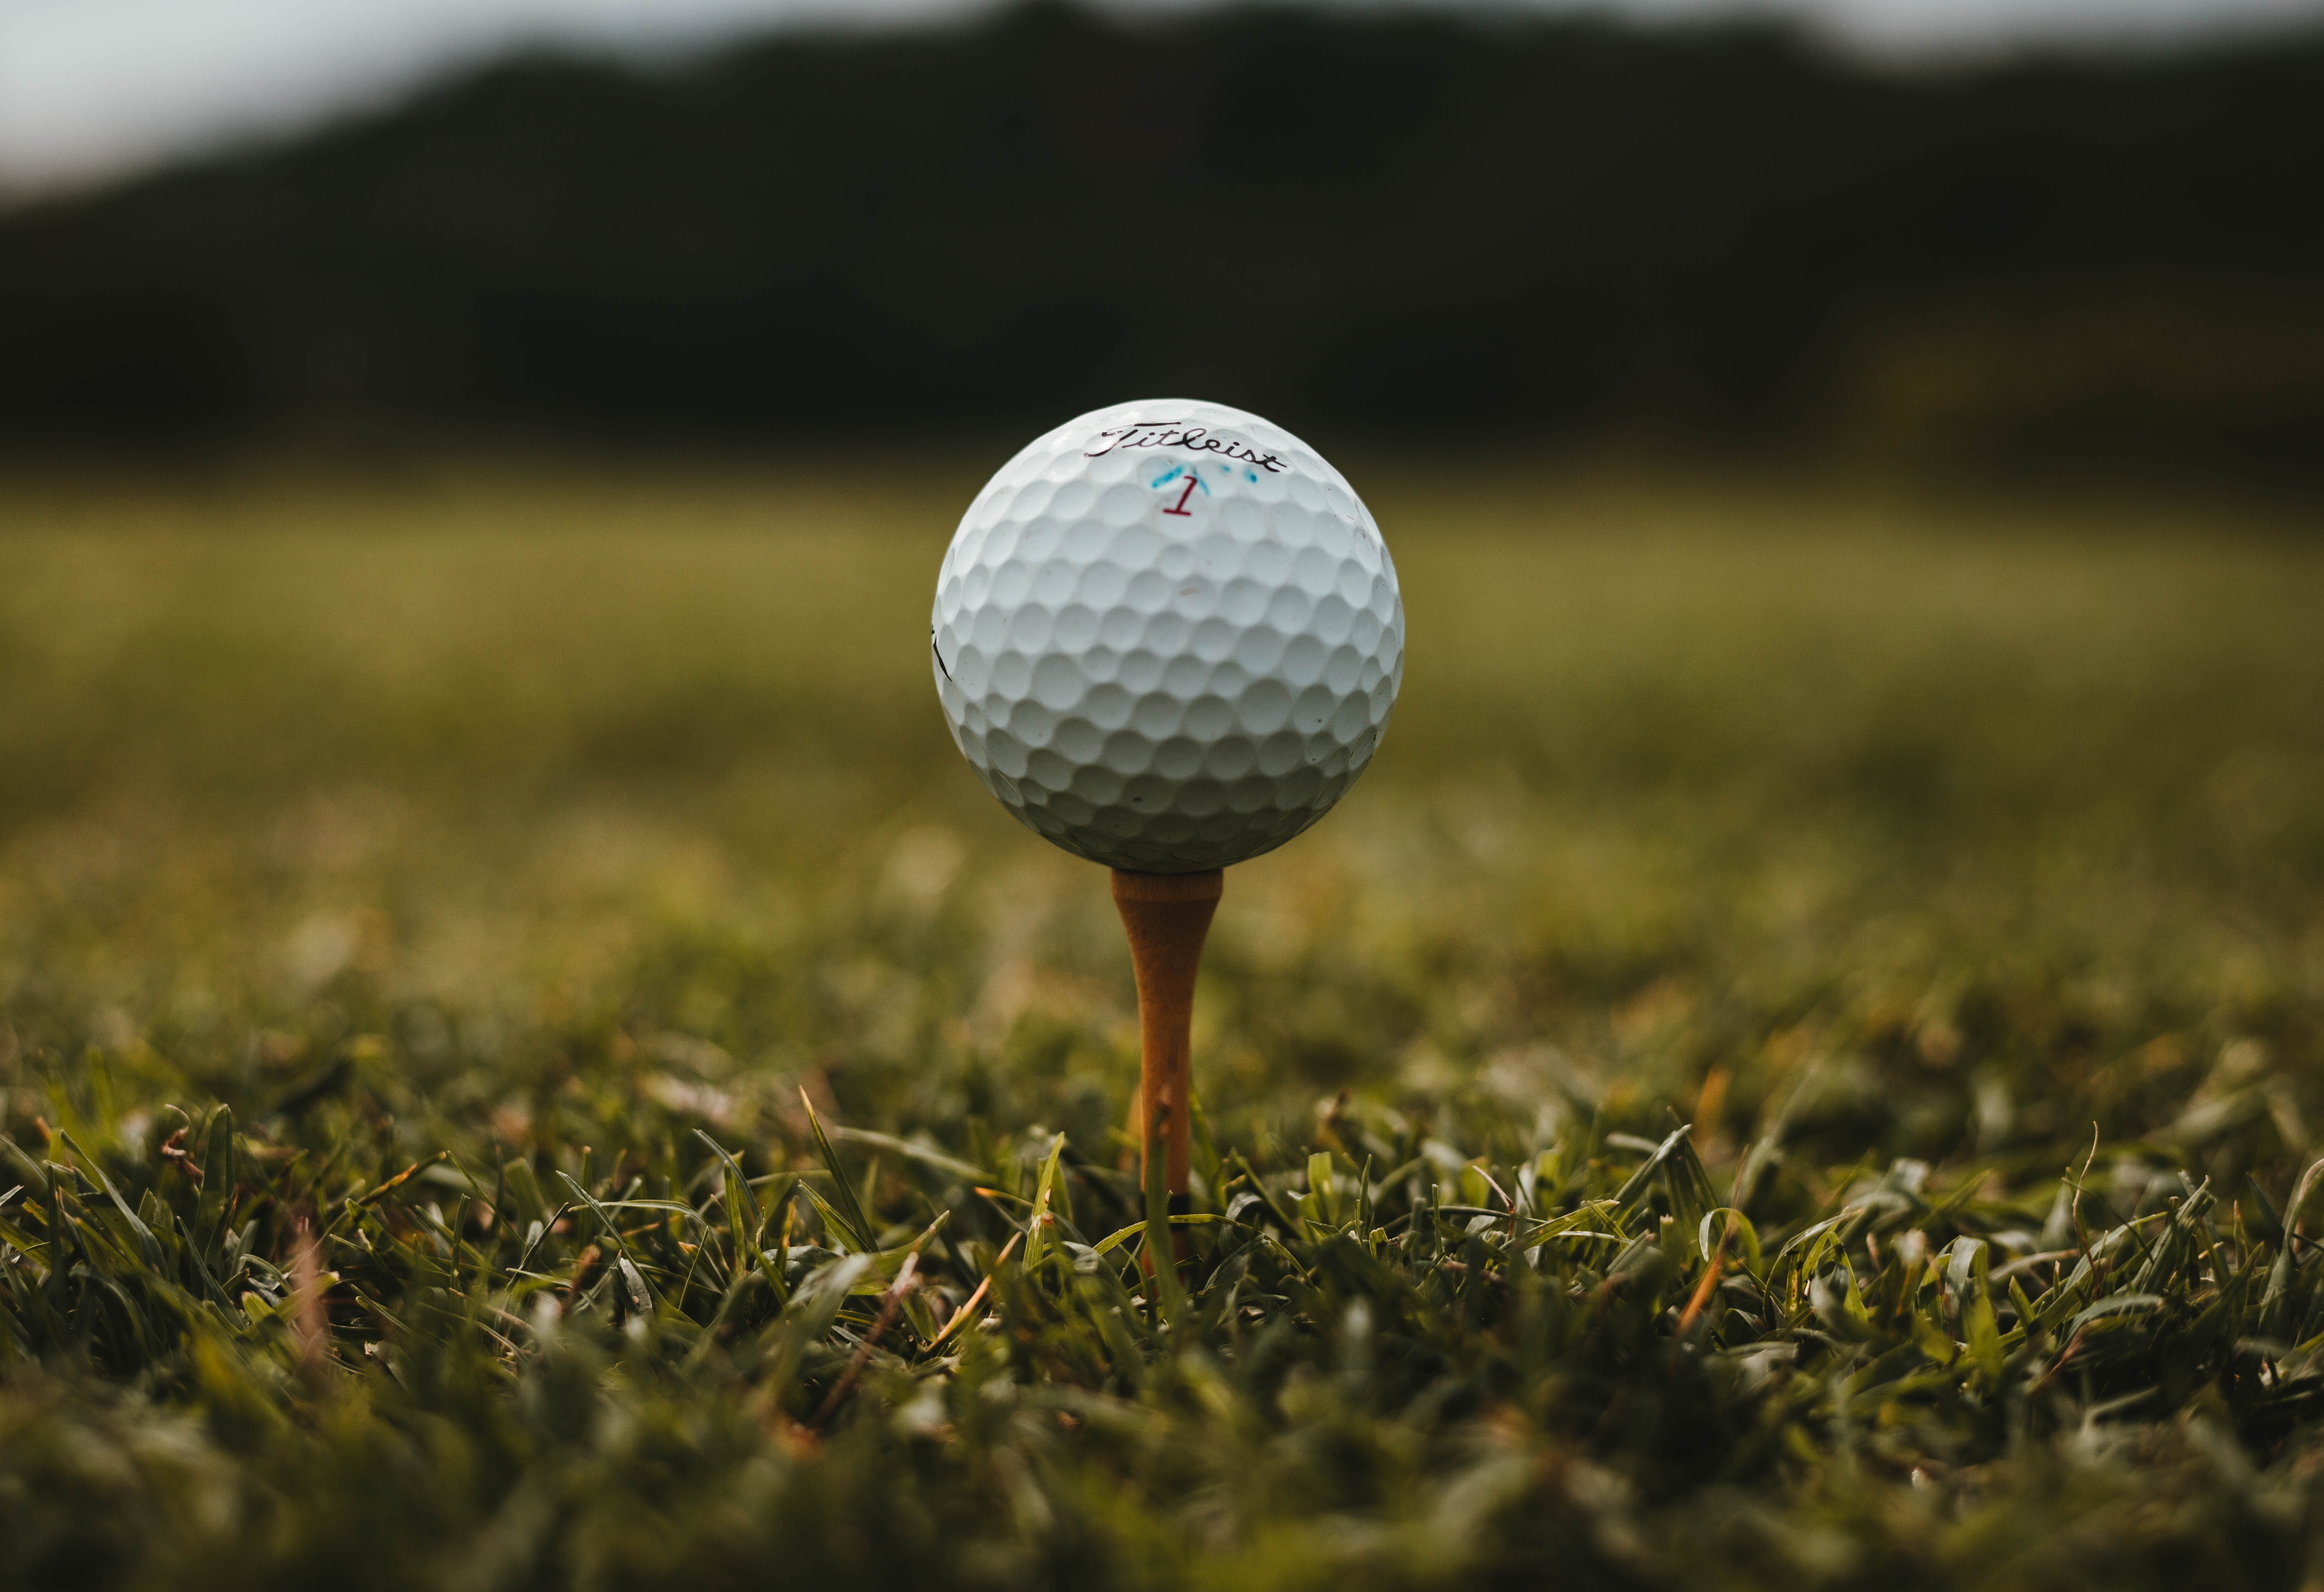 Golf ball on a tee, placed in grass.